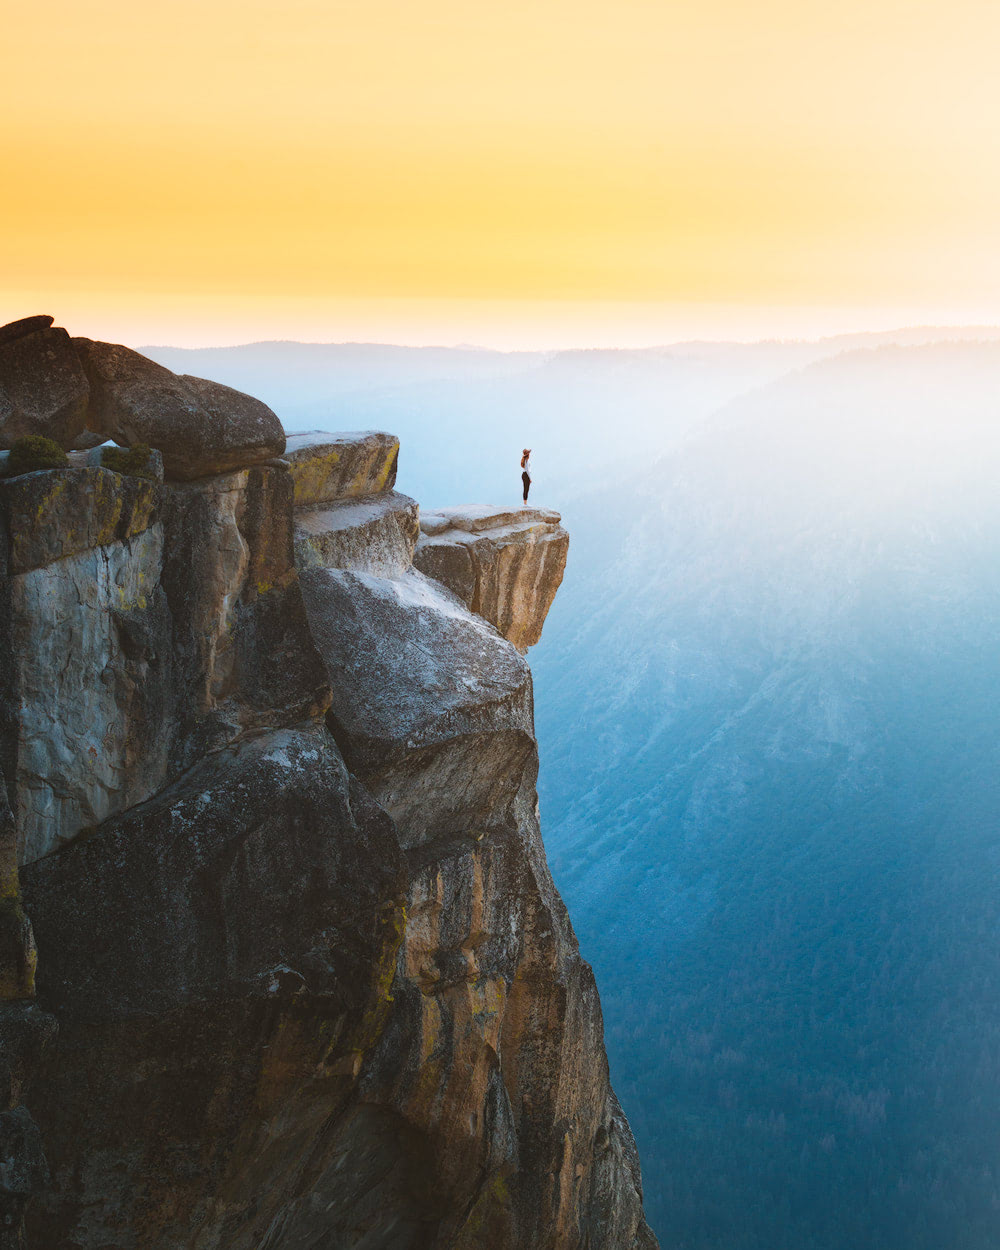 The Ultimate Guide to Exploring Yosemite National Park - Taft Point Sunset